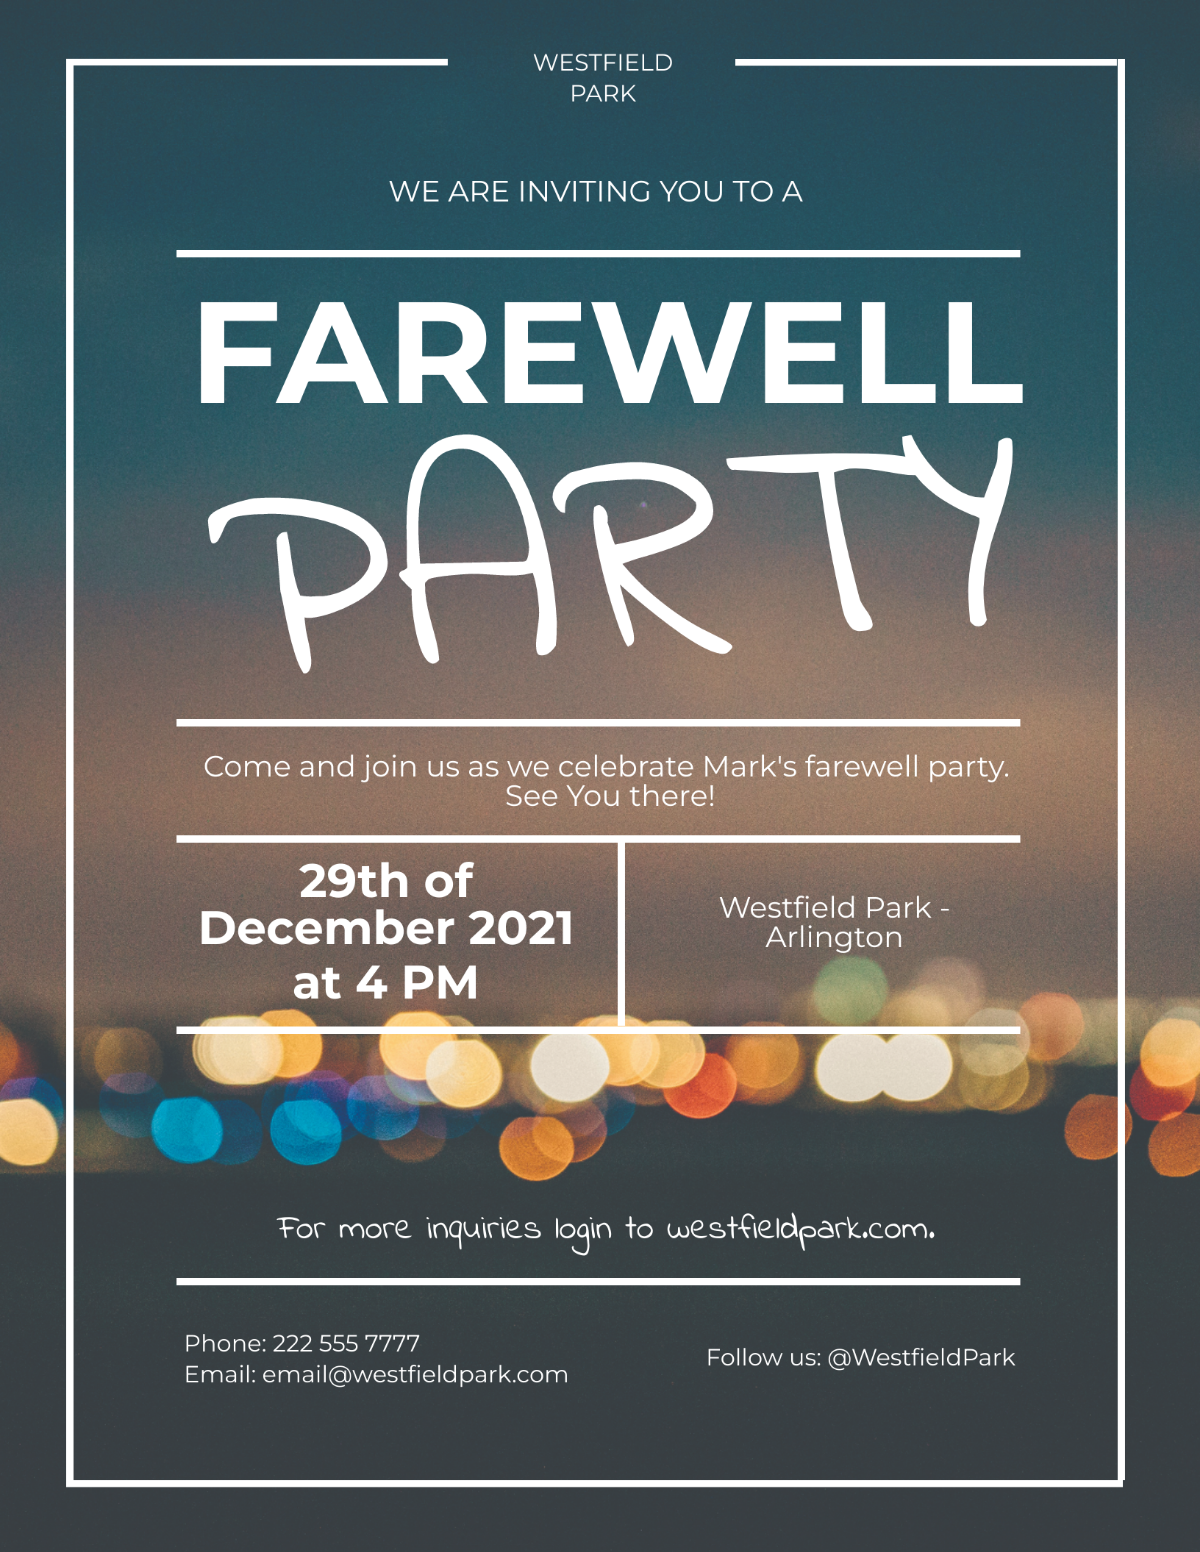 Farewell Party Flyer